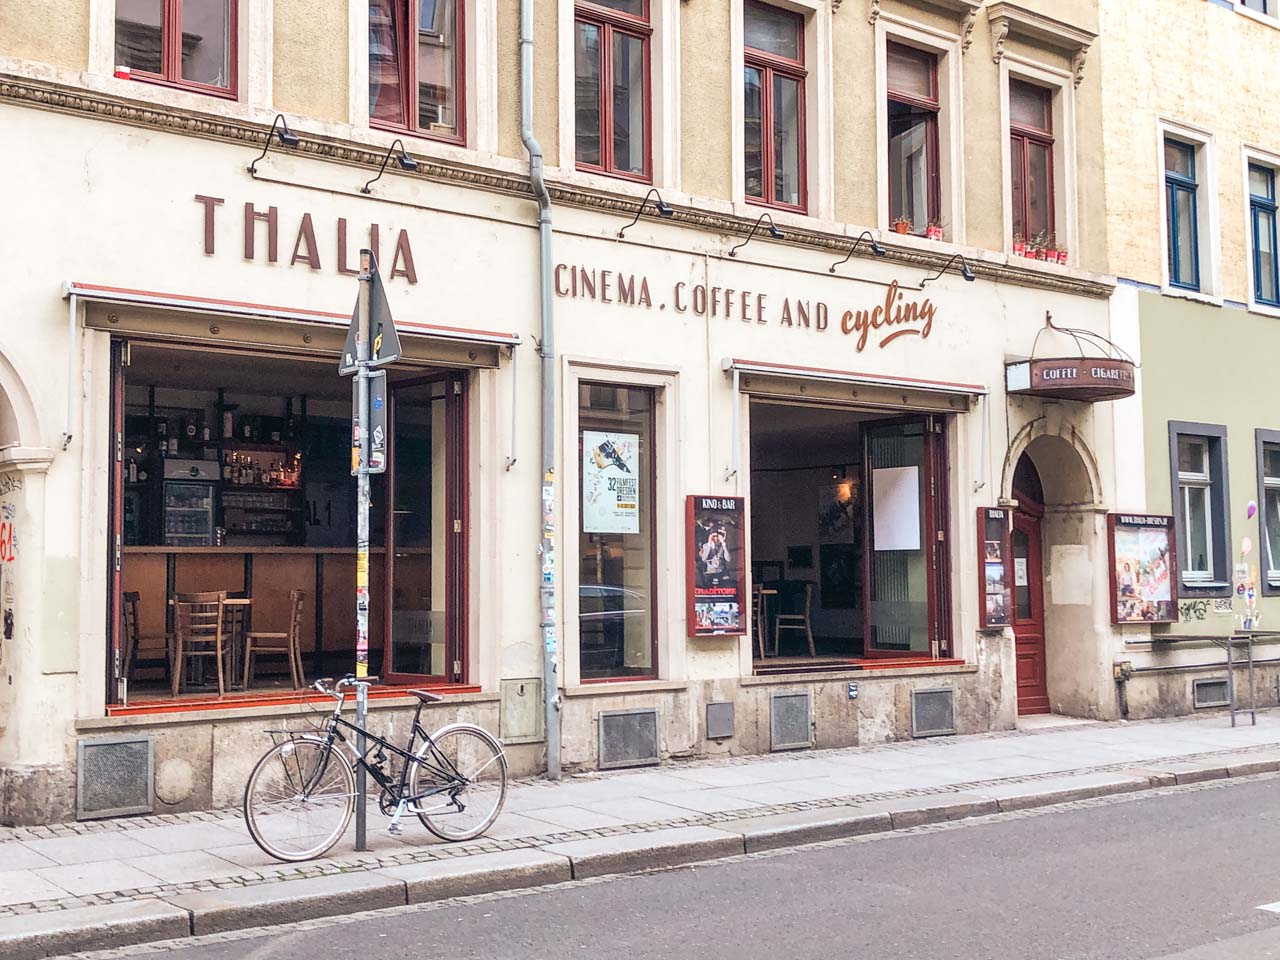 A bike parked outside Thalia in Dresden, Germany